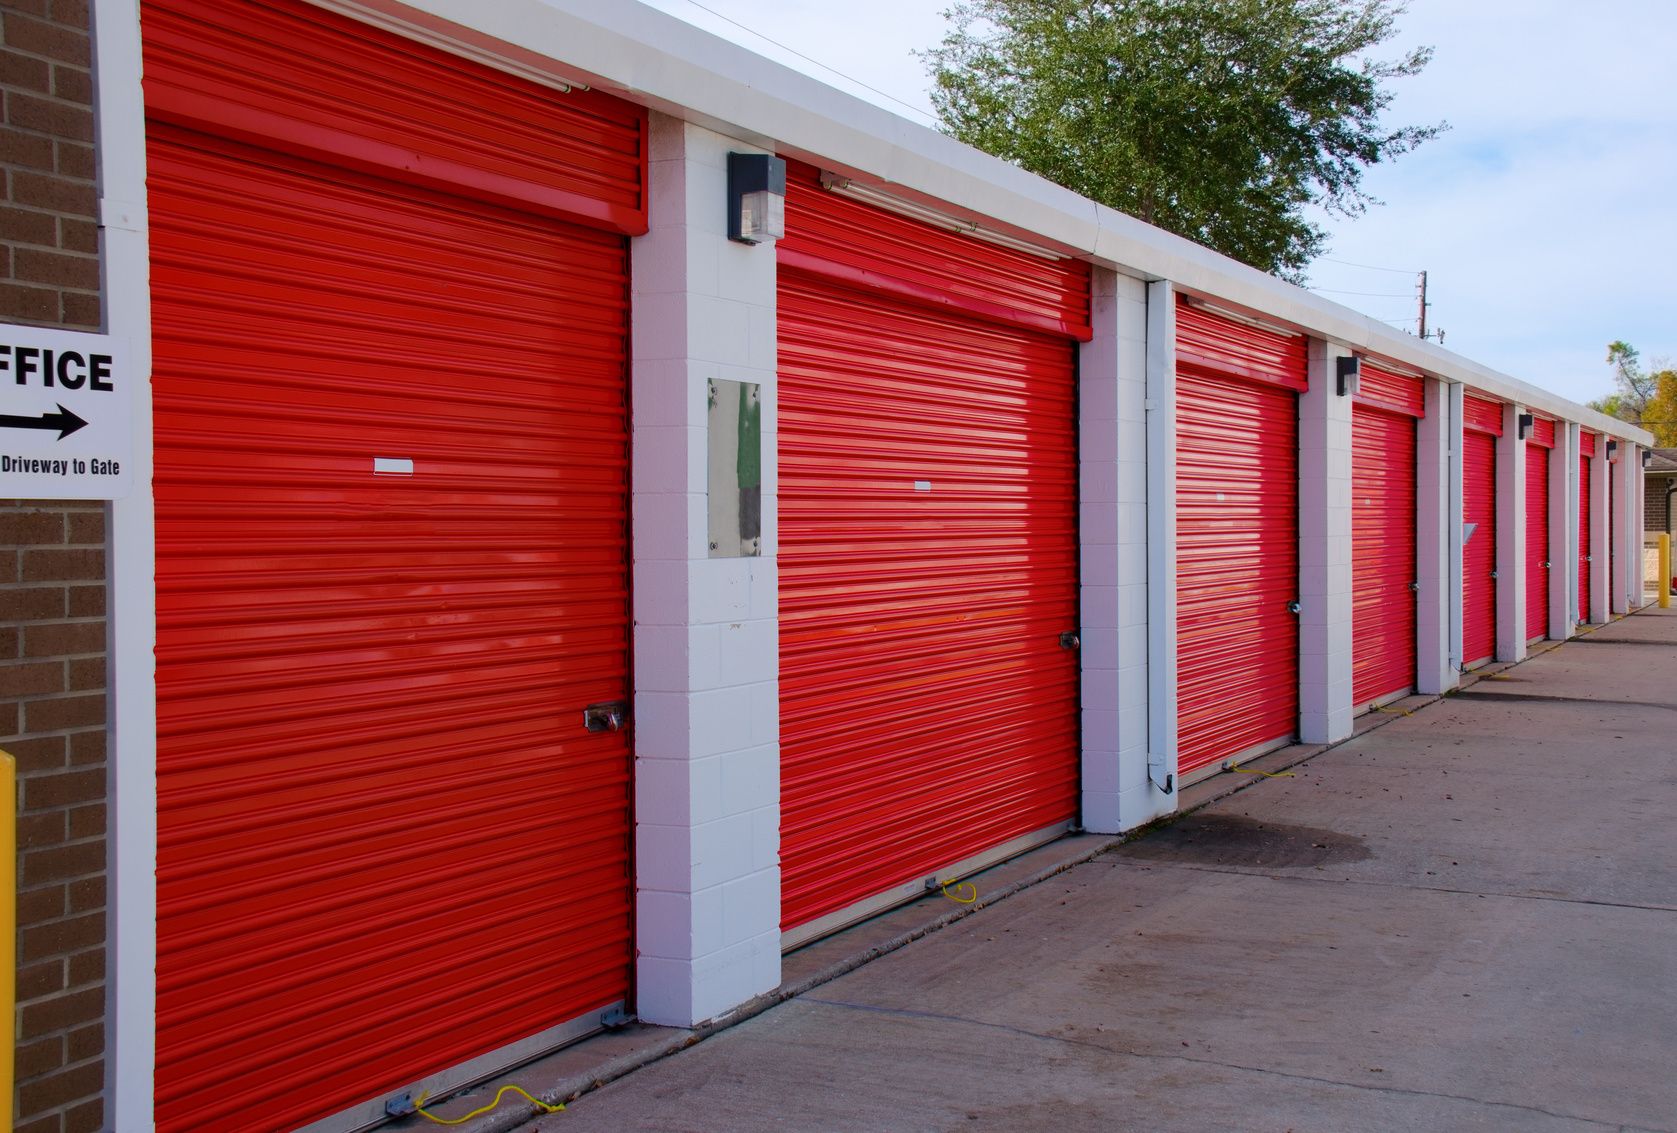 Don't Have Room? Ask Us about Our Large Storage Units